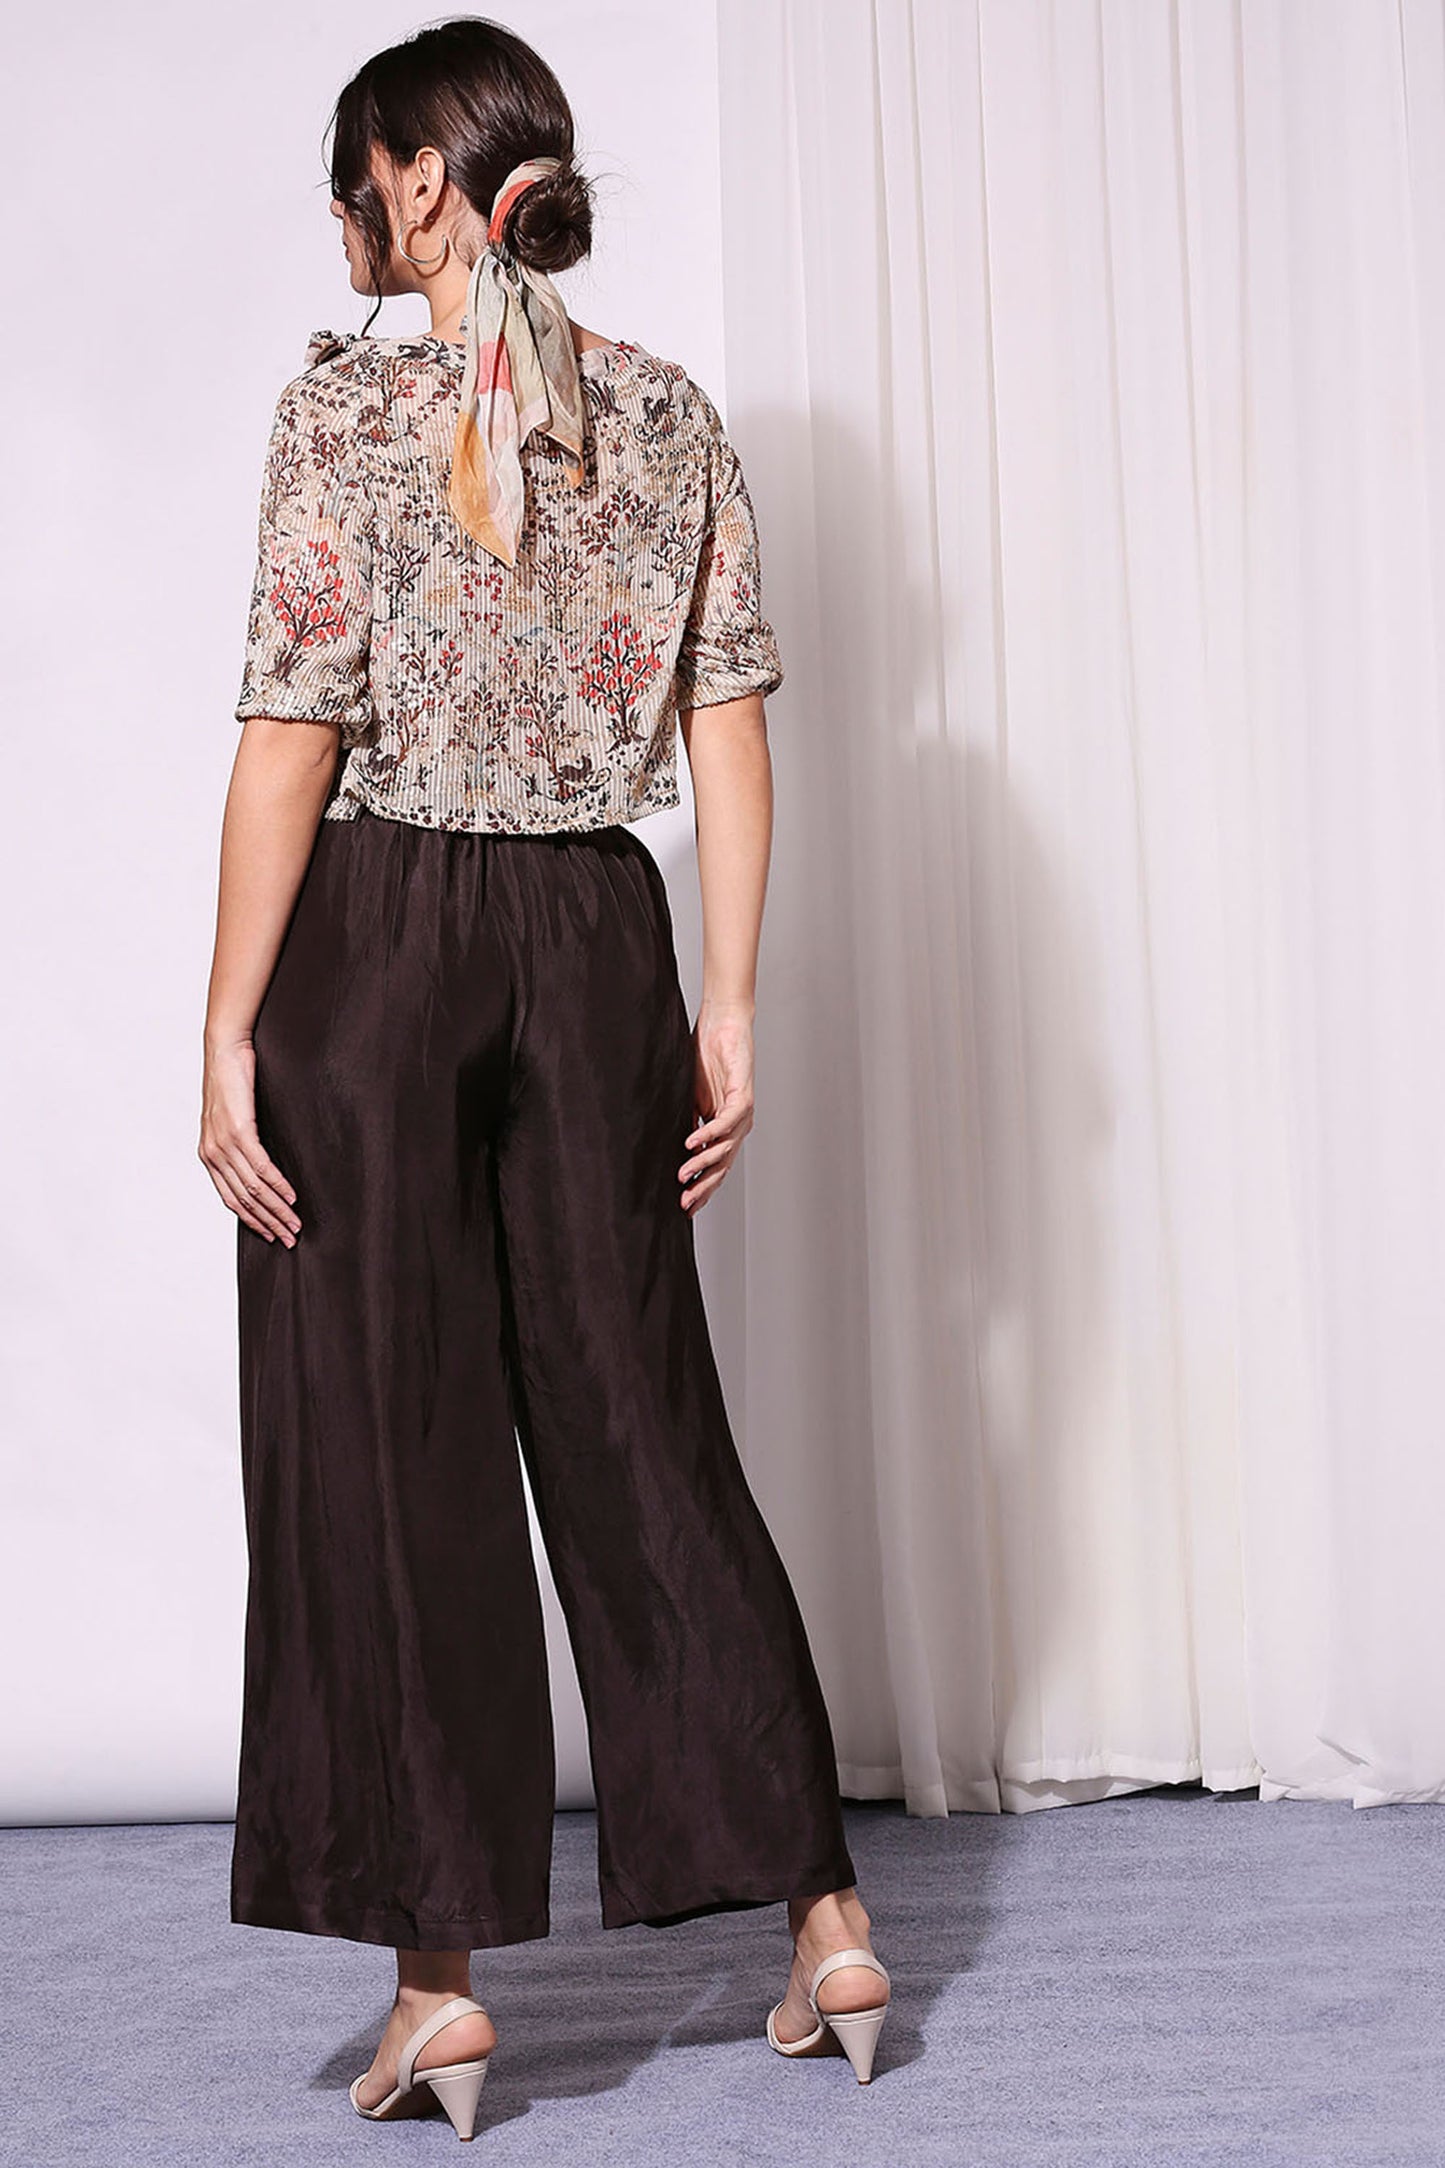 Beige & Black Printed Sequin Off-Shoulder Top Paired With Pants